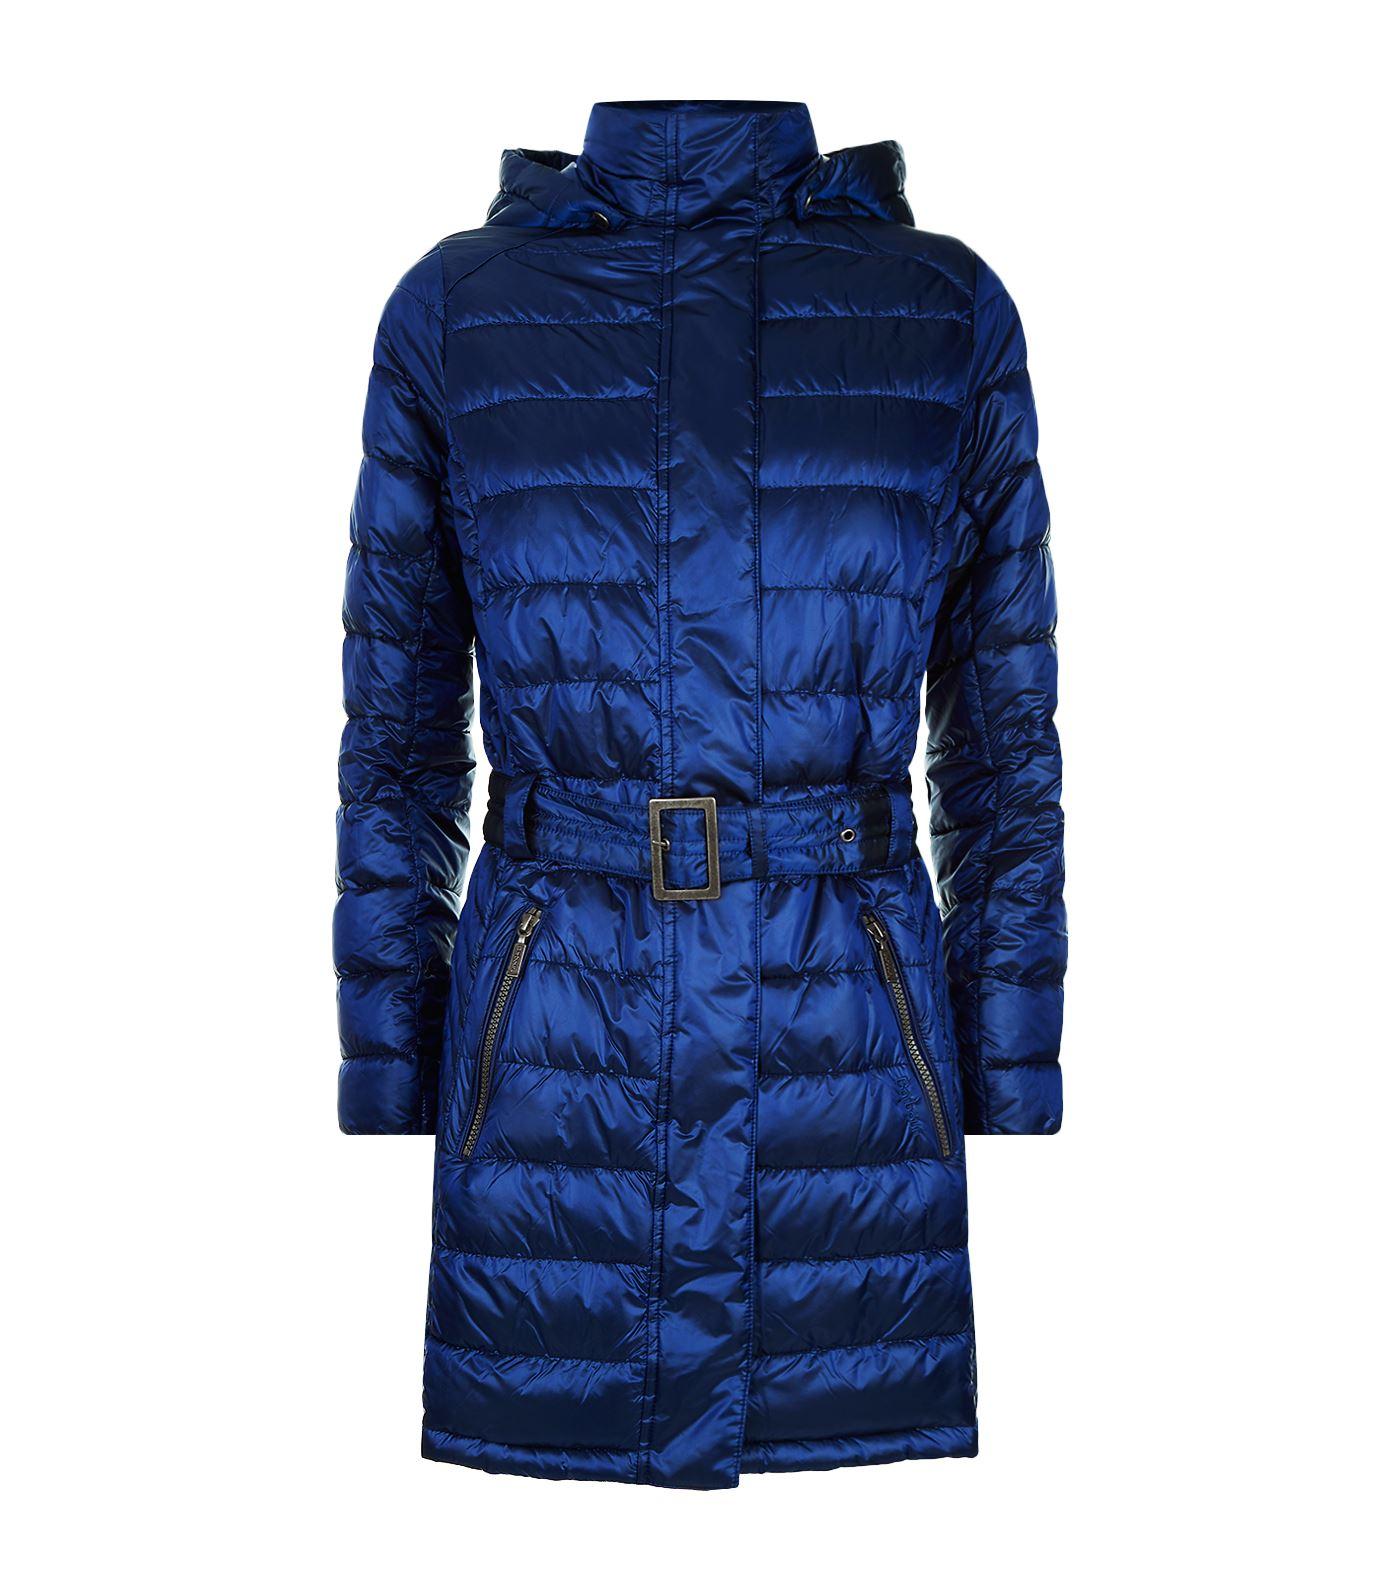 barbour braemar belted quilted jacket